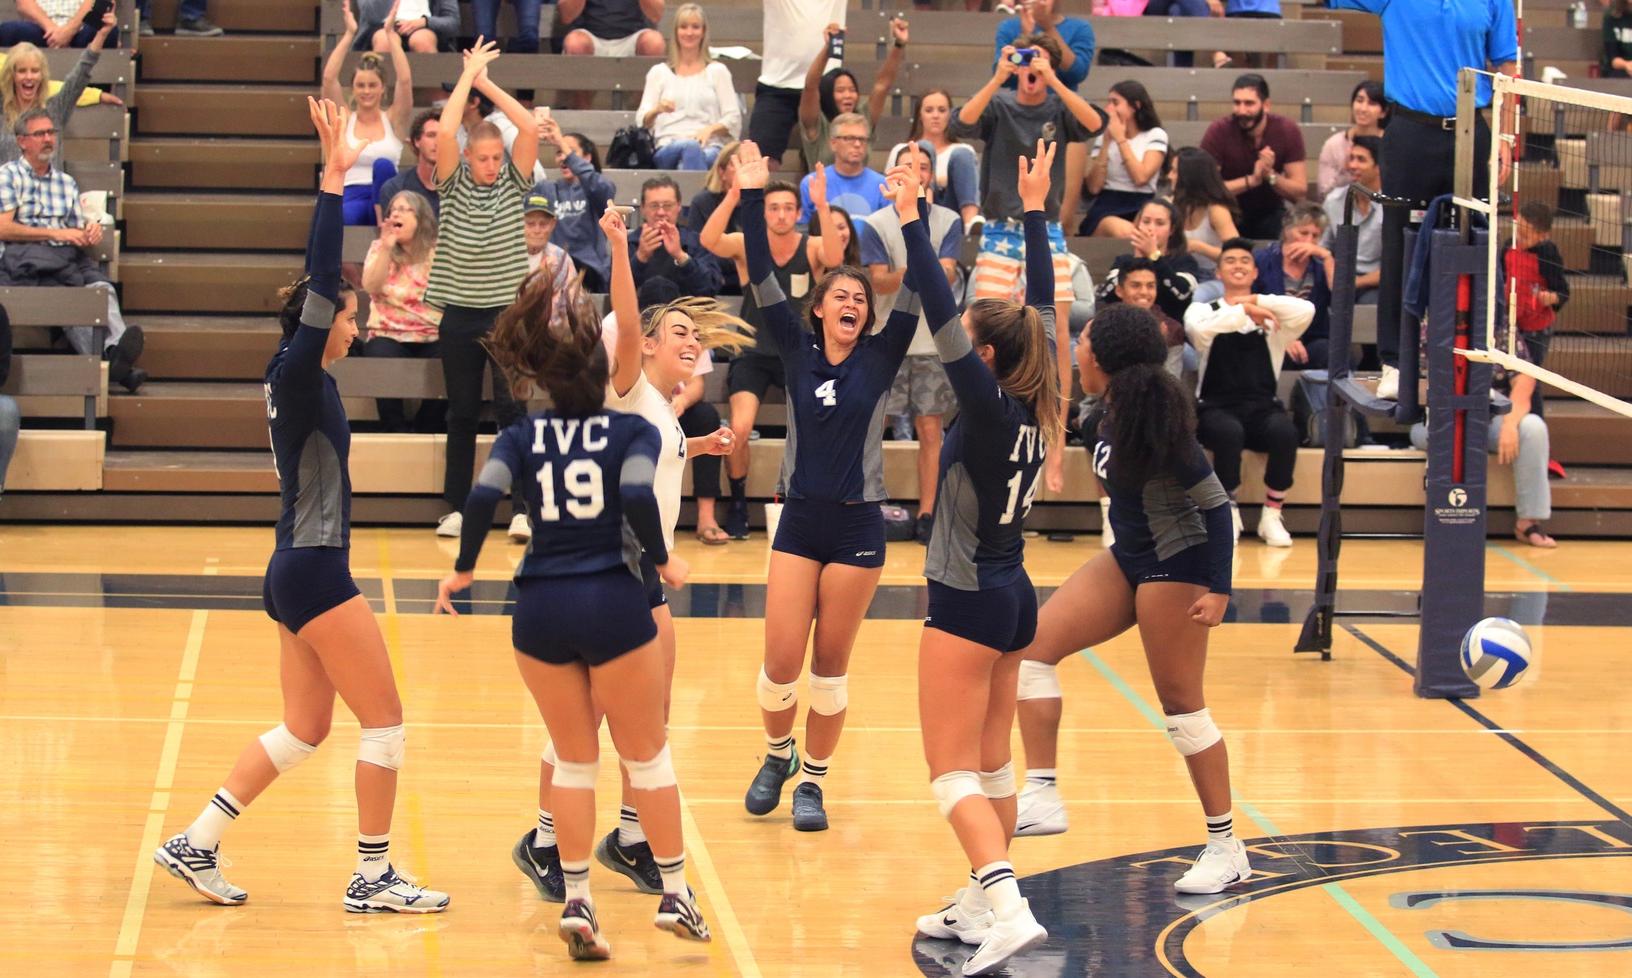 Women's volleyball opens 2018 season at home Wednesday